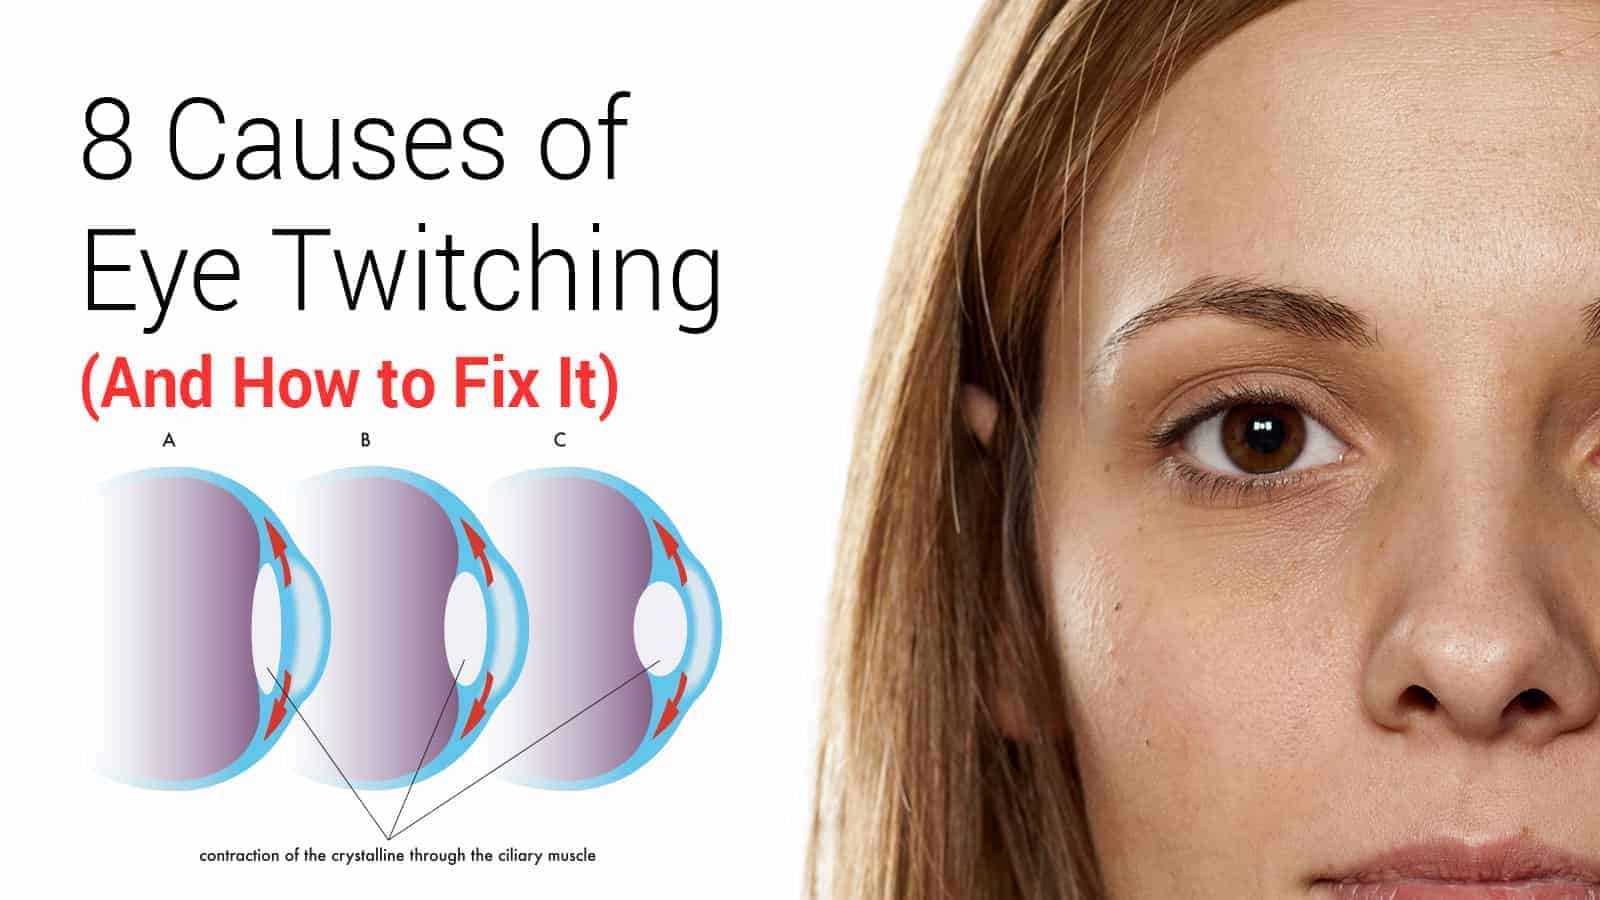 8 Causes of Eye Twitching and How to Fix It